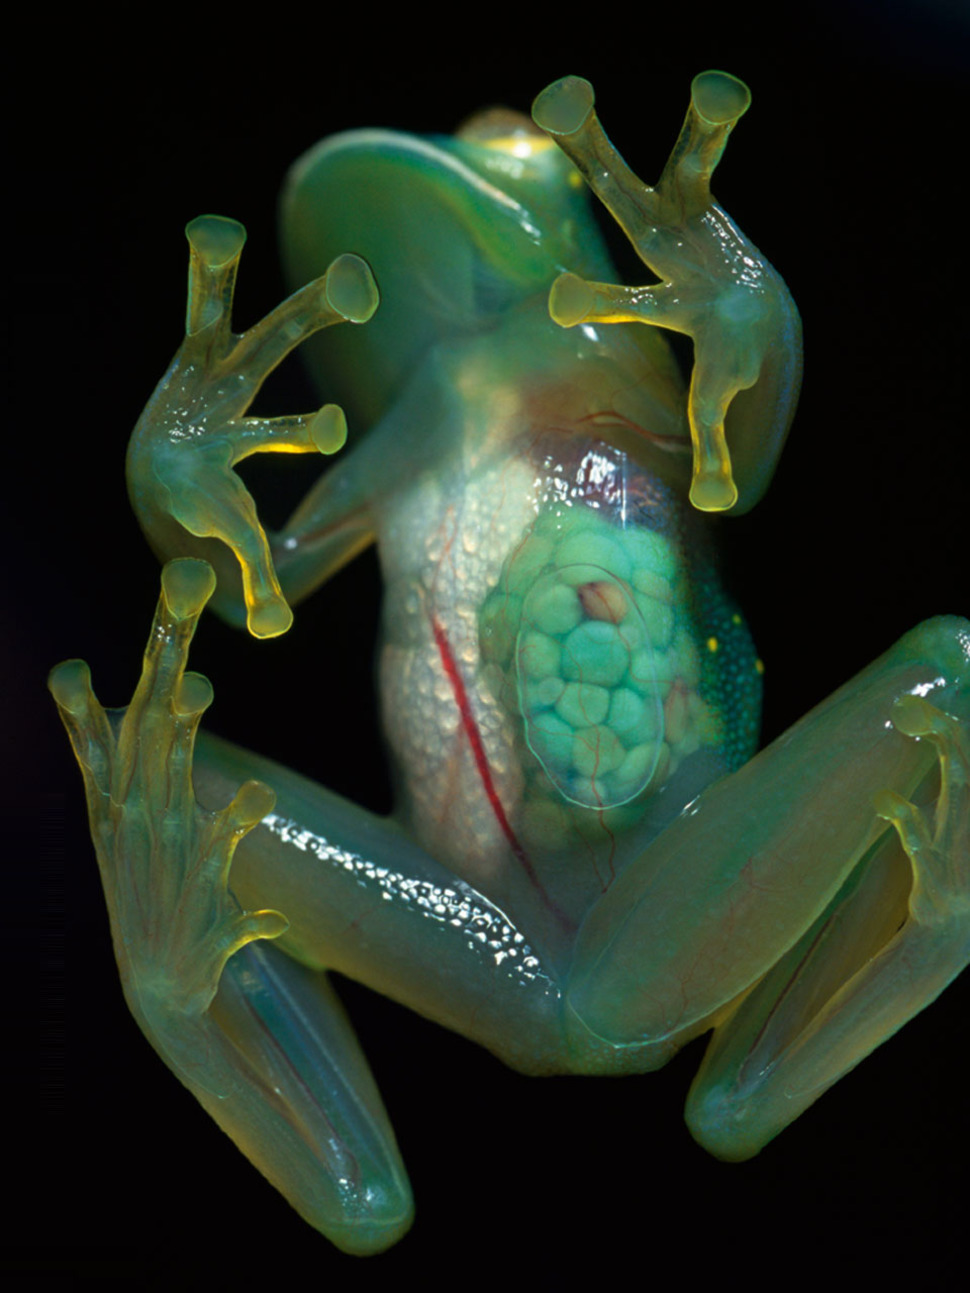 Glass FrogThis amazing amphibian has a transparent under-belly allowing you to see a fully visible system of organs. These nocturnal creatures are tiny  a mere 28 centimetres  and live in the canopies of Central and South American rain forests. When they sit still, theyre extremely difficult to spot from a distance.